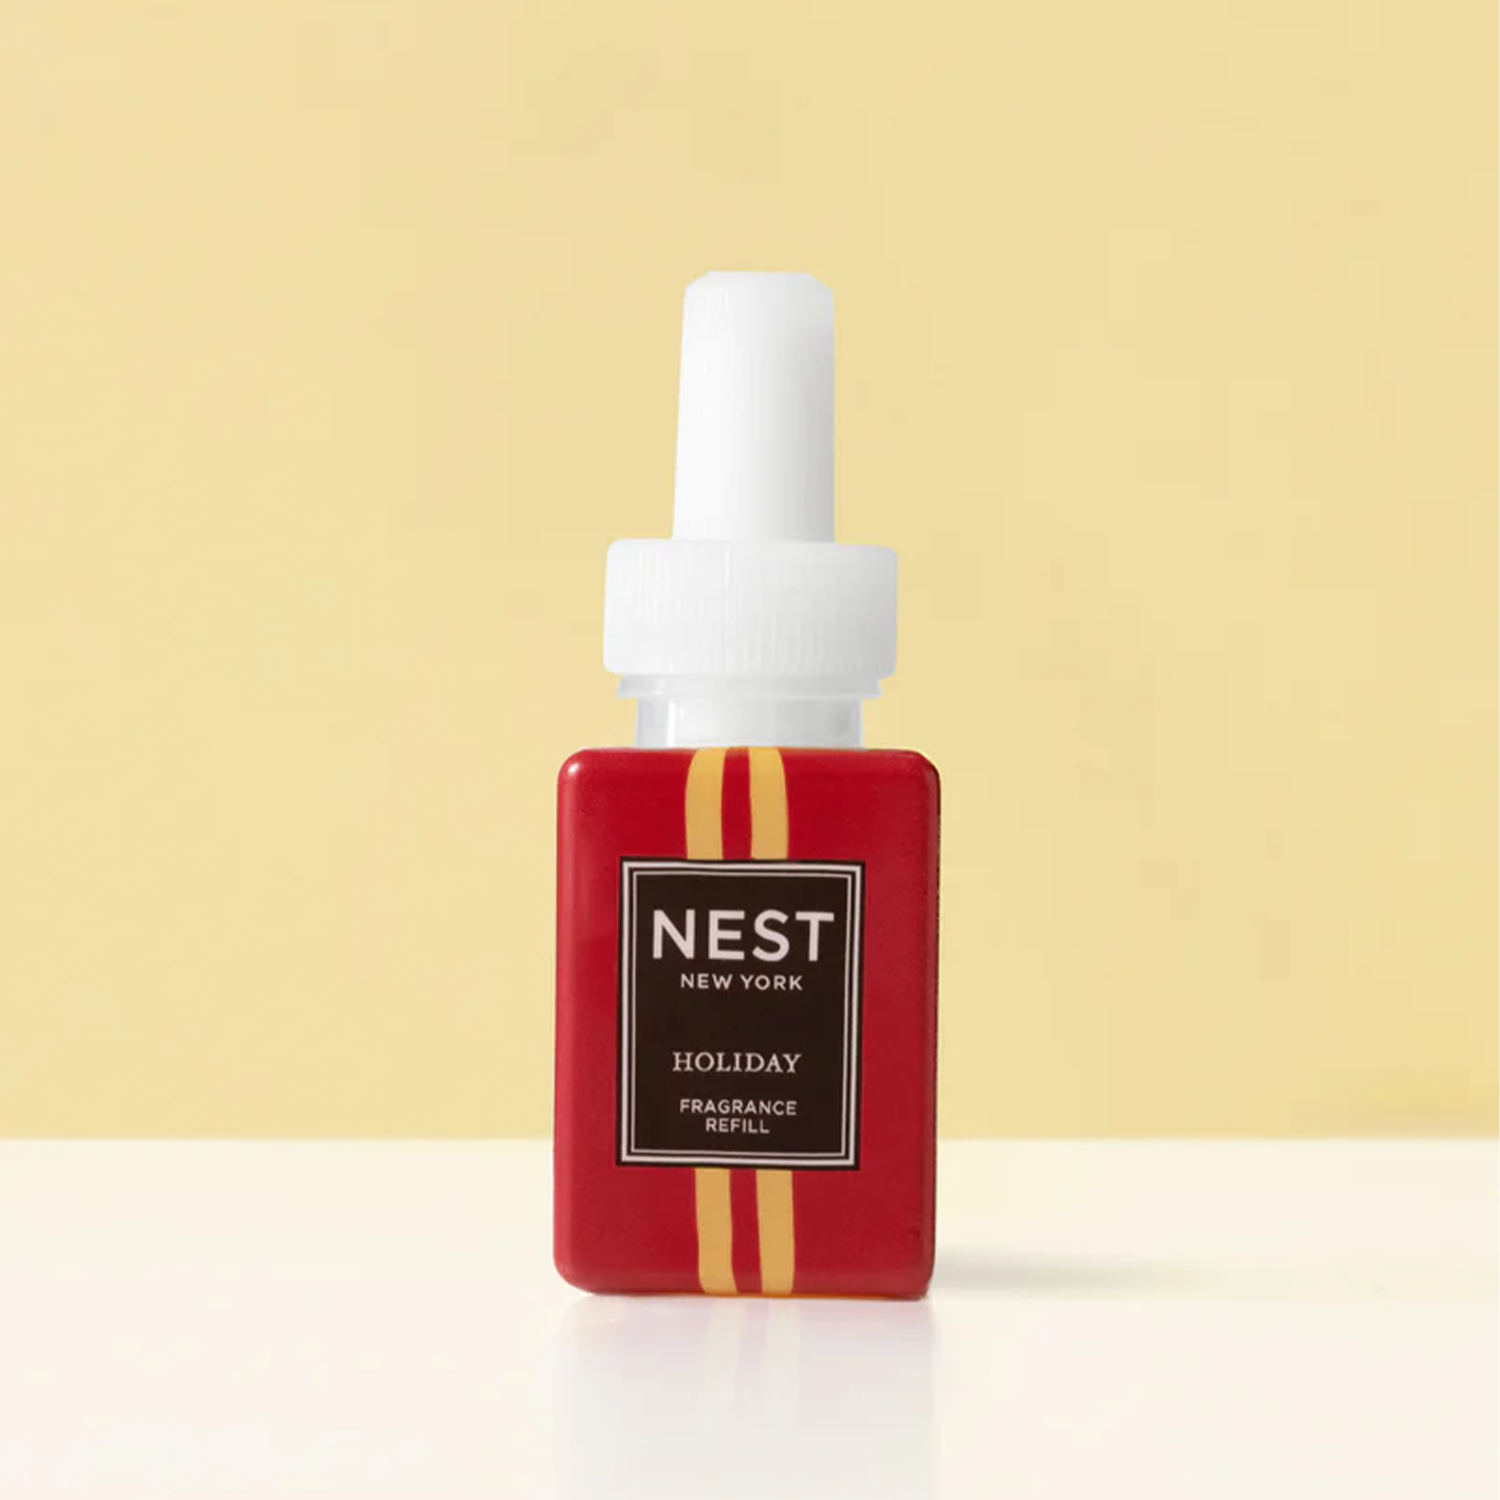 Nest Holiday scent for Pura